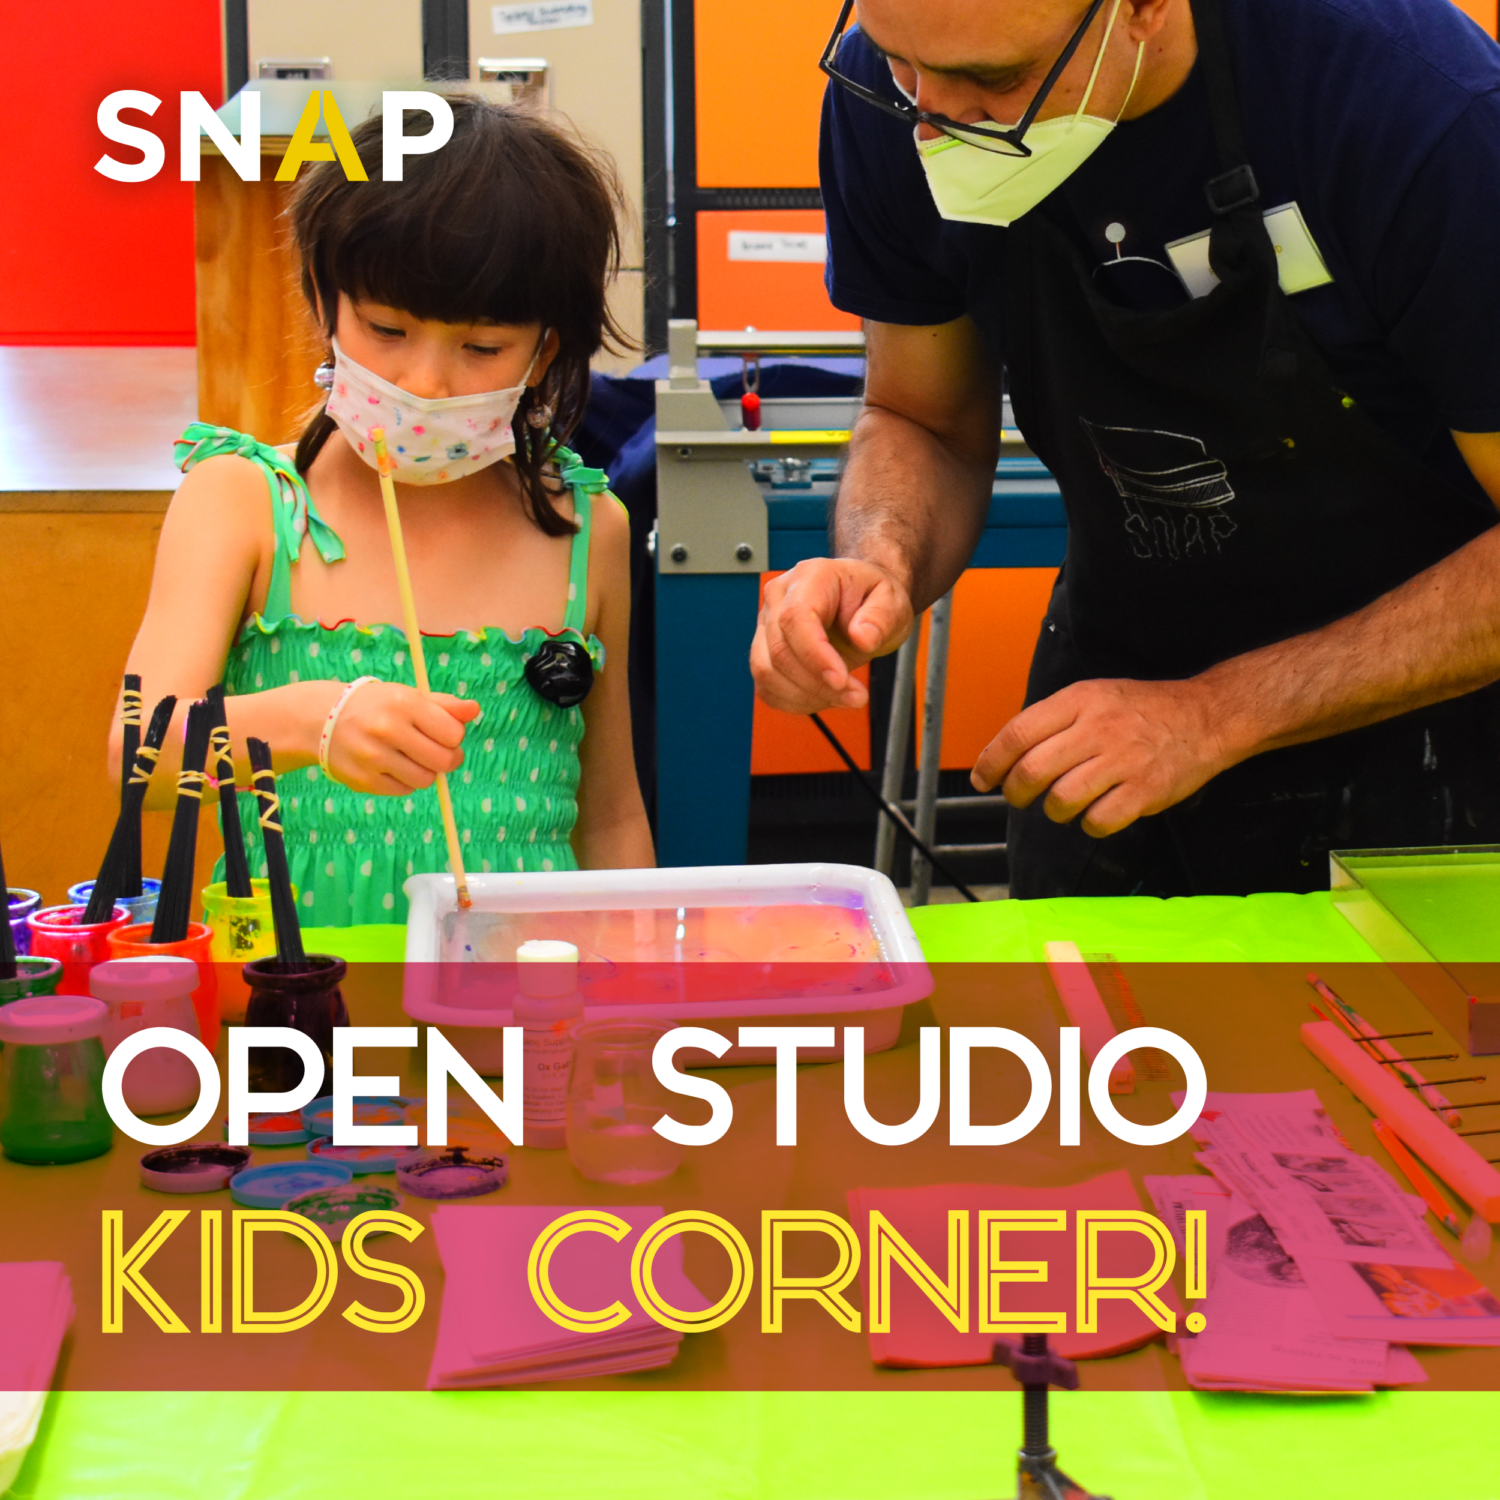 An image of a child being guided by a volunteer while making art in SNAP Studio, accompanied by the text "Open Studio Kids Corner"